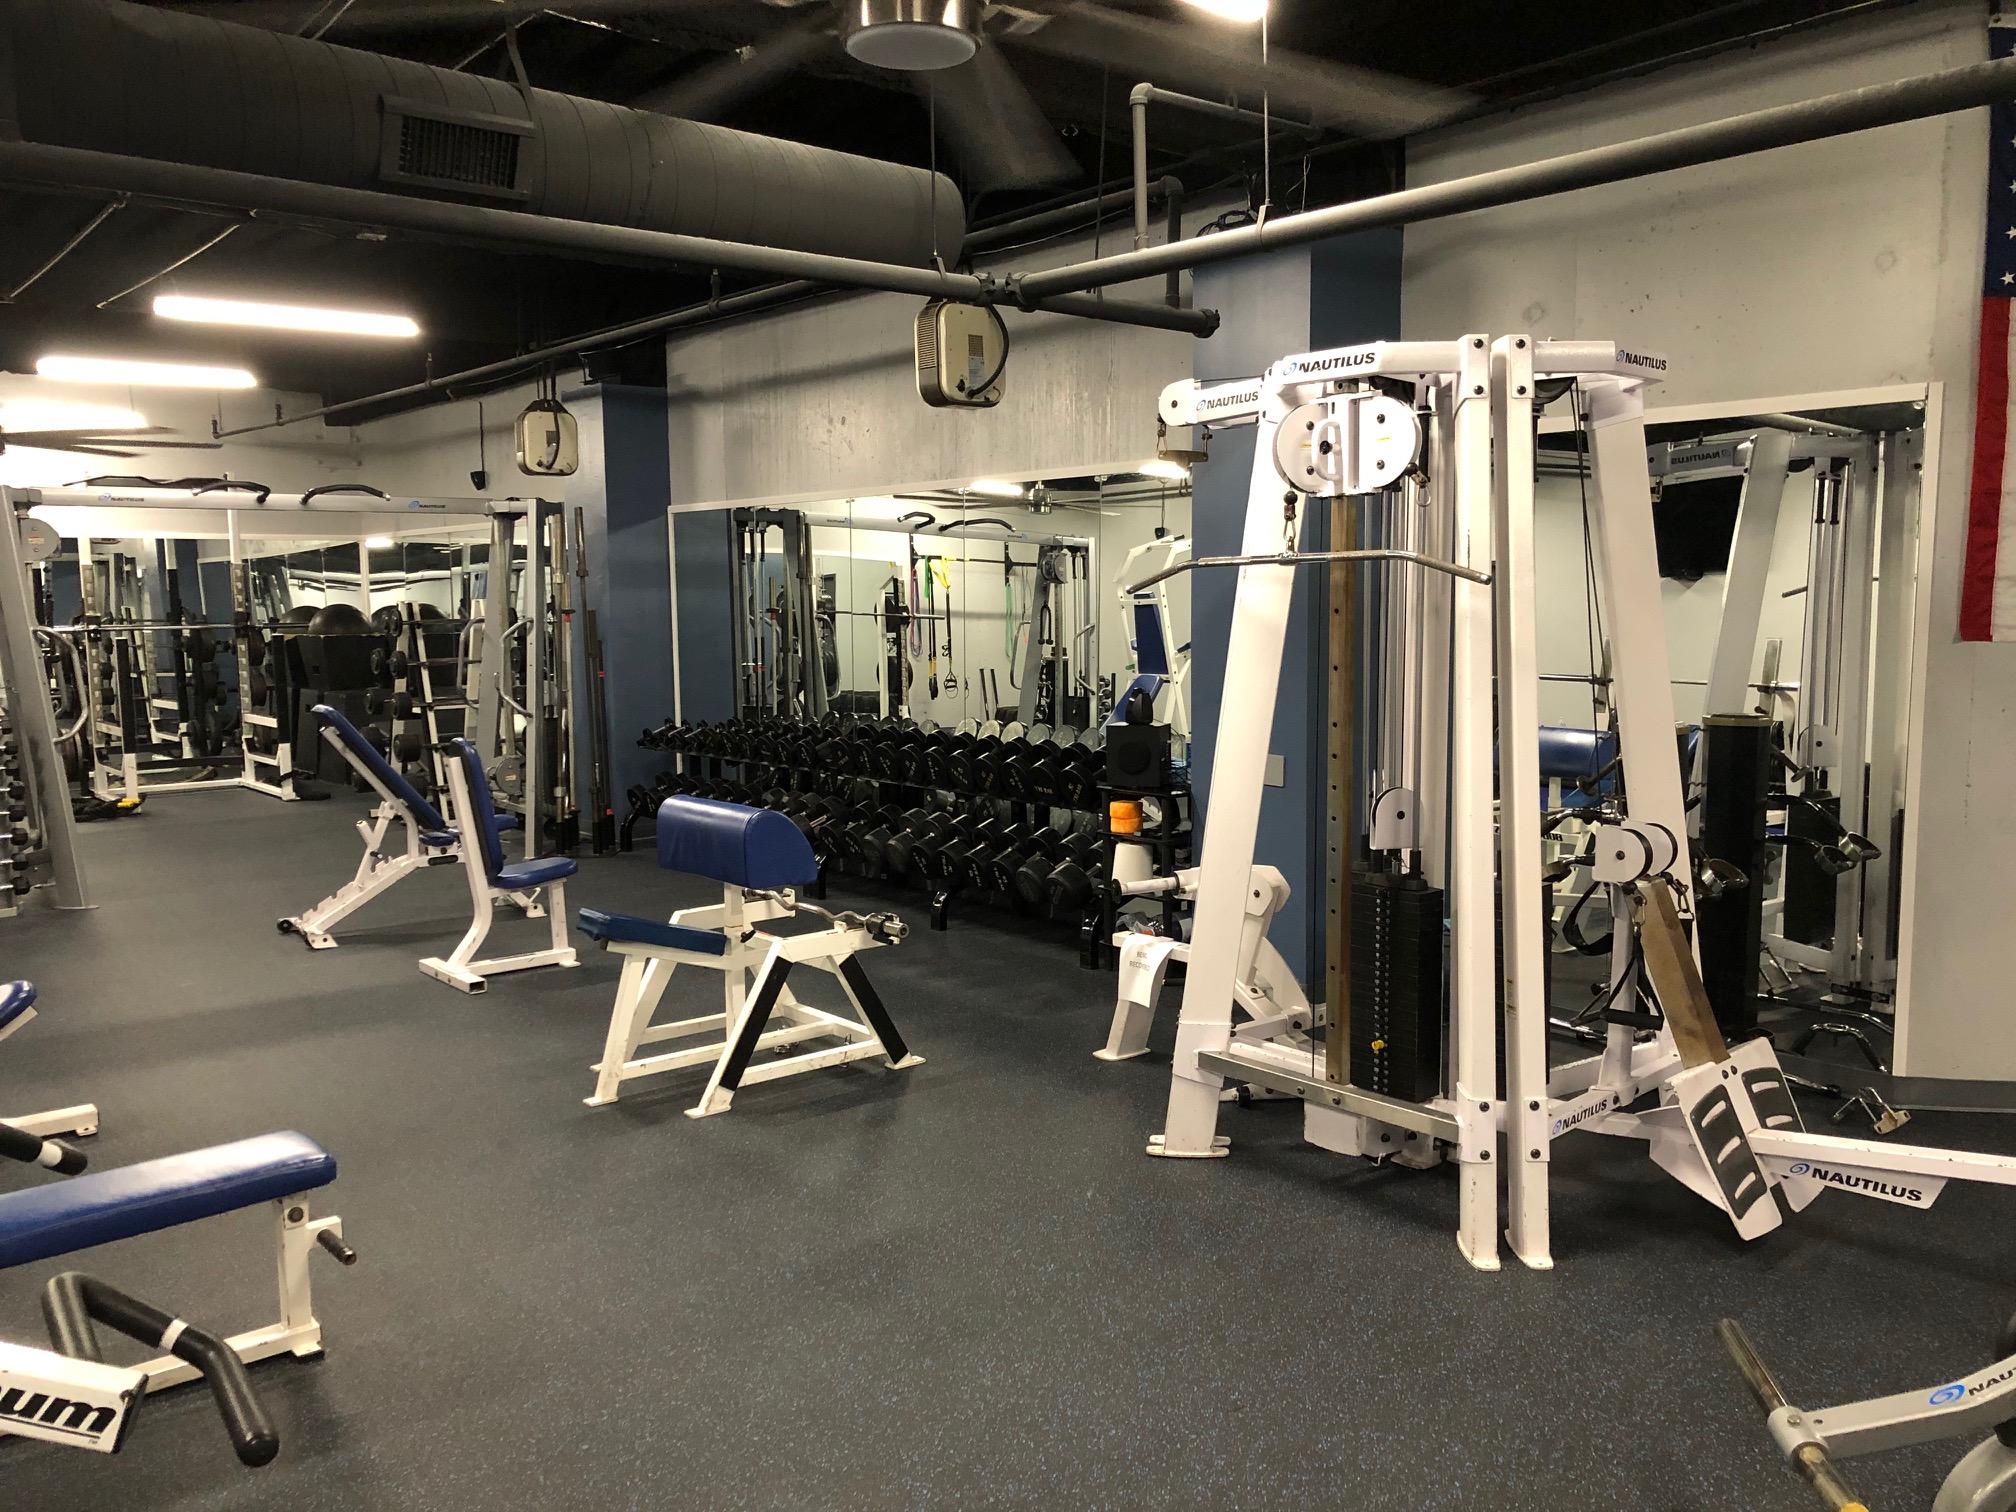 Marietta police transform basement into fitness center for employees